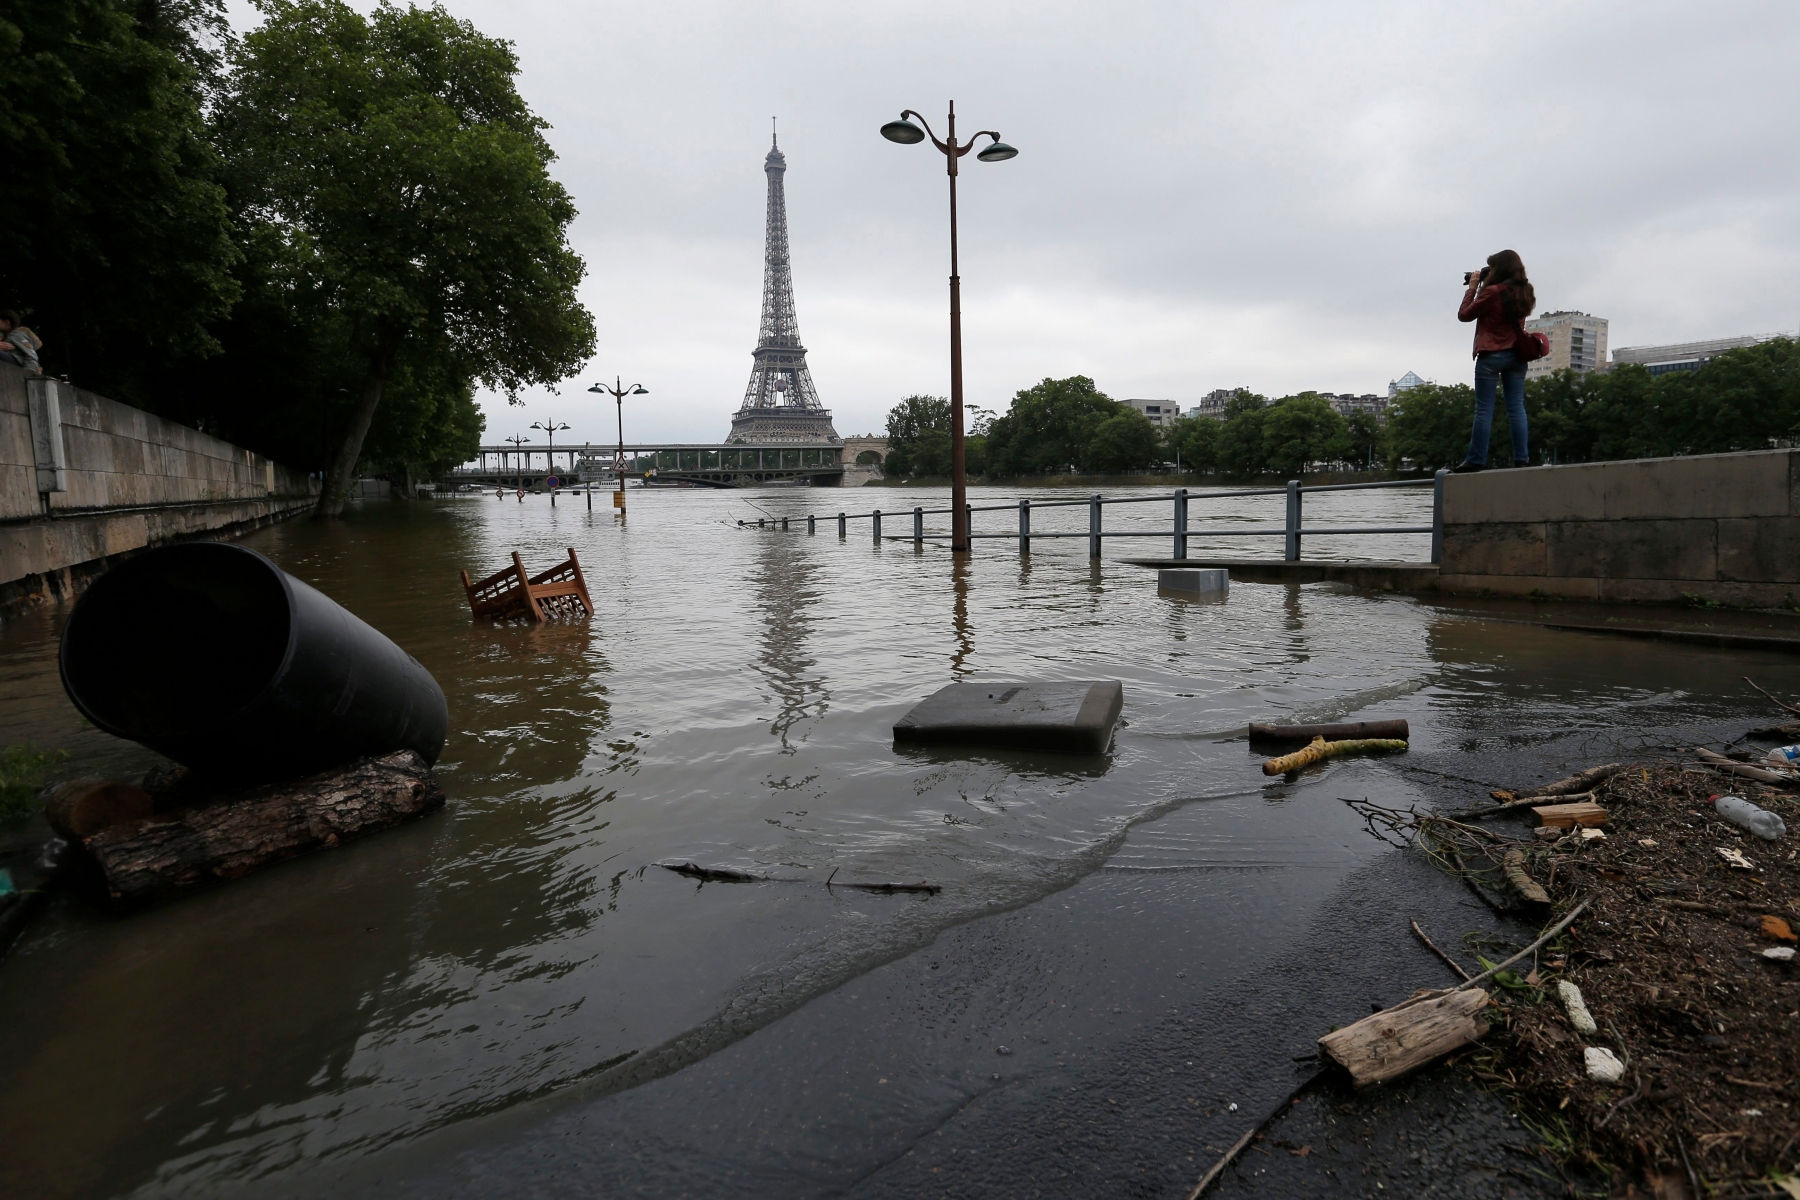 A woman takes photos of the flooded banks of the Seine river in Paris, France Saturday June 4, 2016. The level of the Seine started to drop after peaking earlier in the morning. Both the Louvre and Orsay museums were closed as officials said the Seine had been at its highest level in nearly 35 years. (AP Photo/Francois Mori) France Floods